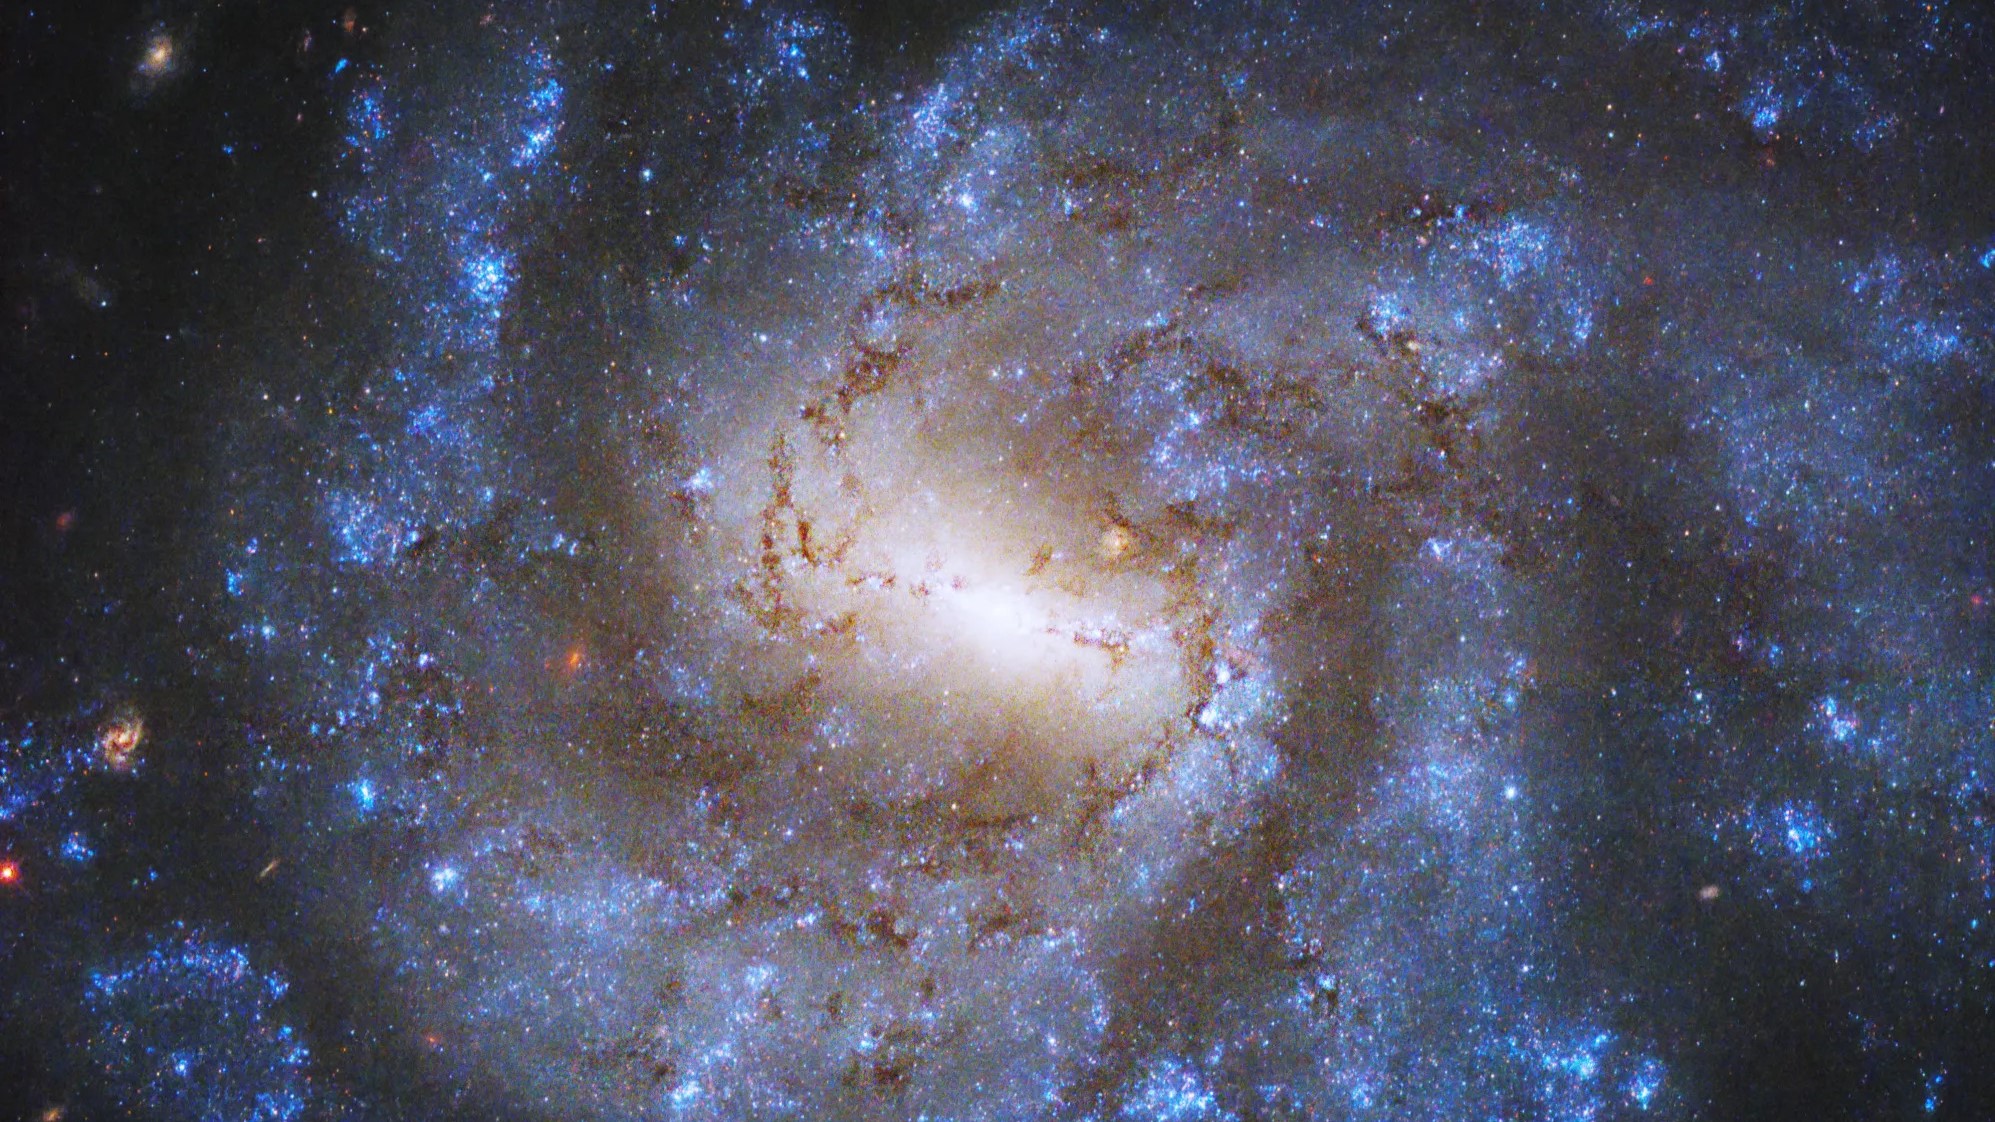 Hubble Telescope captures star-packed galaxy spinning like a top (photo) Space